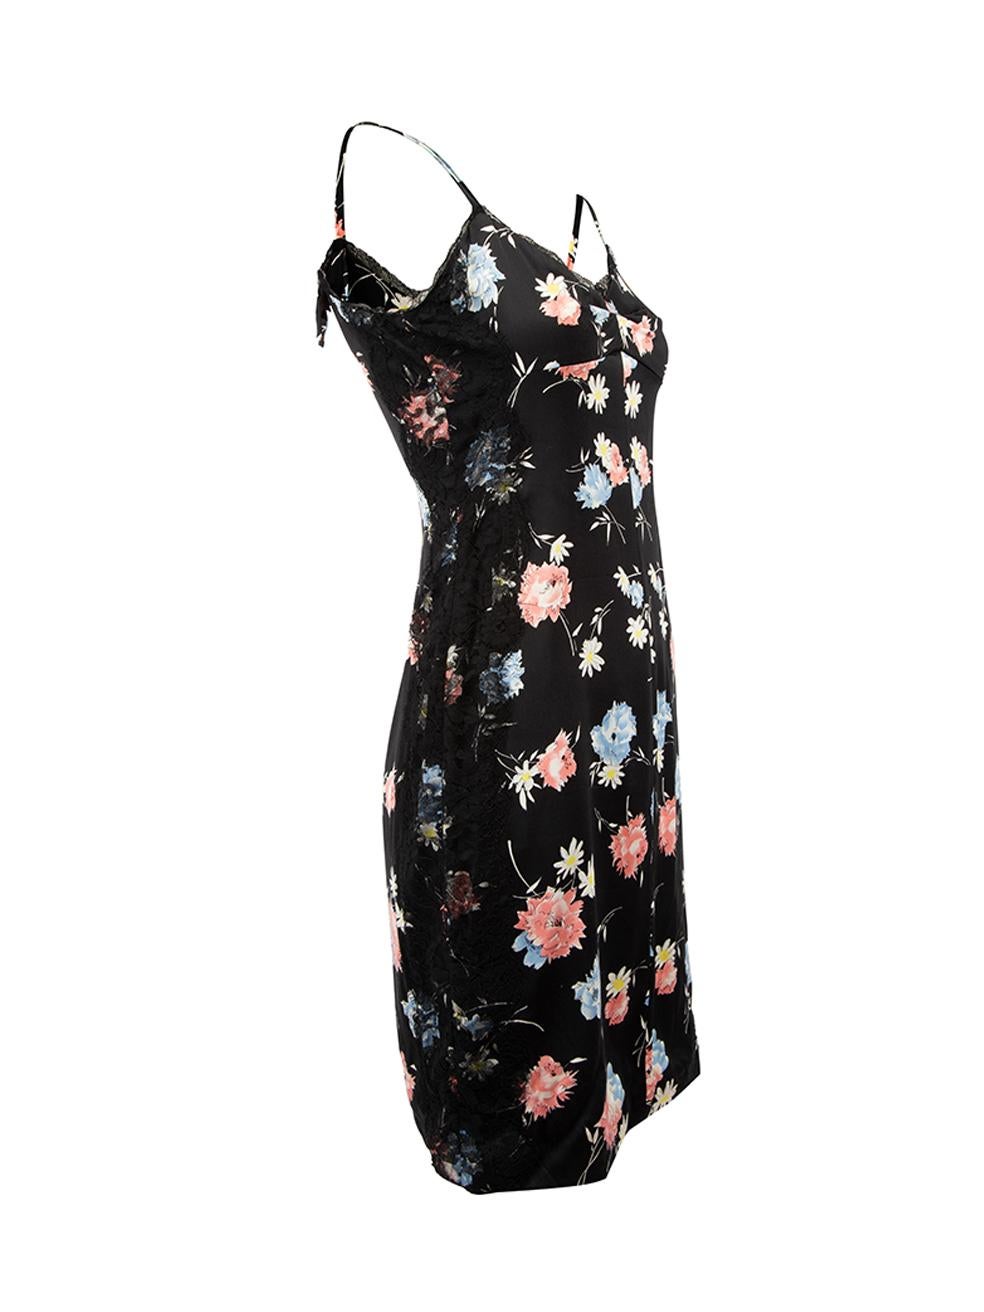 CONDITION is Good. Minor wear to dress is evident. Light wear to the lace at right underarm and faint markings below top seam at rear-right on this used D&G designer resale item. 



Details


Black

Silk

Mini slip dress

Floral pattern

Sweetheart